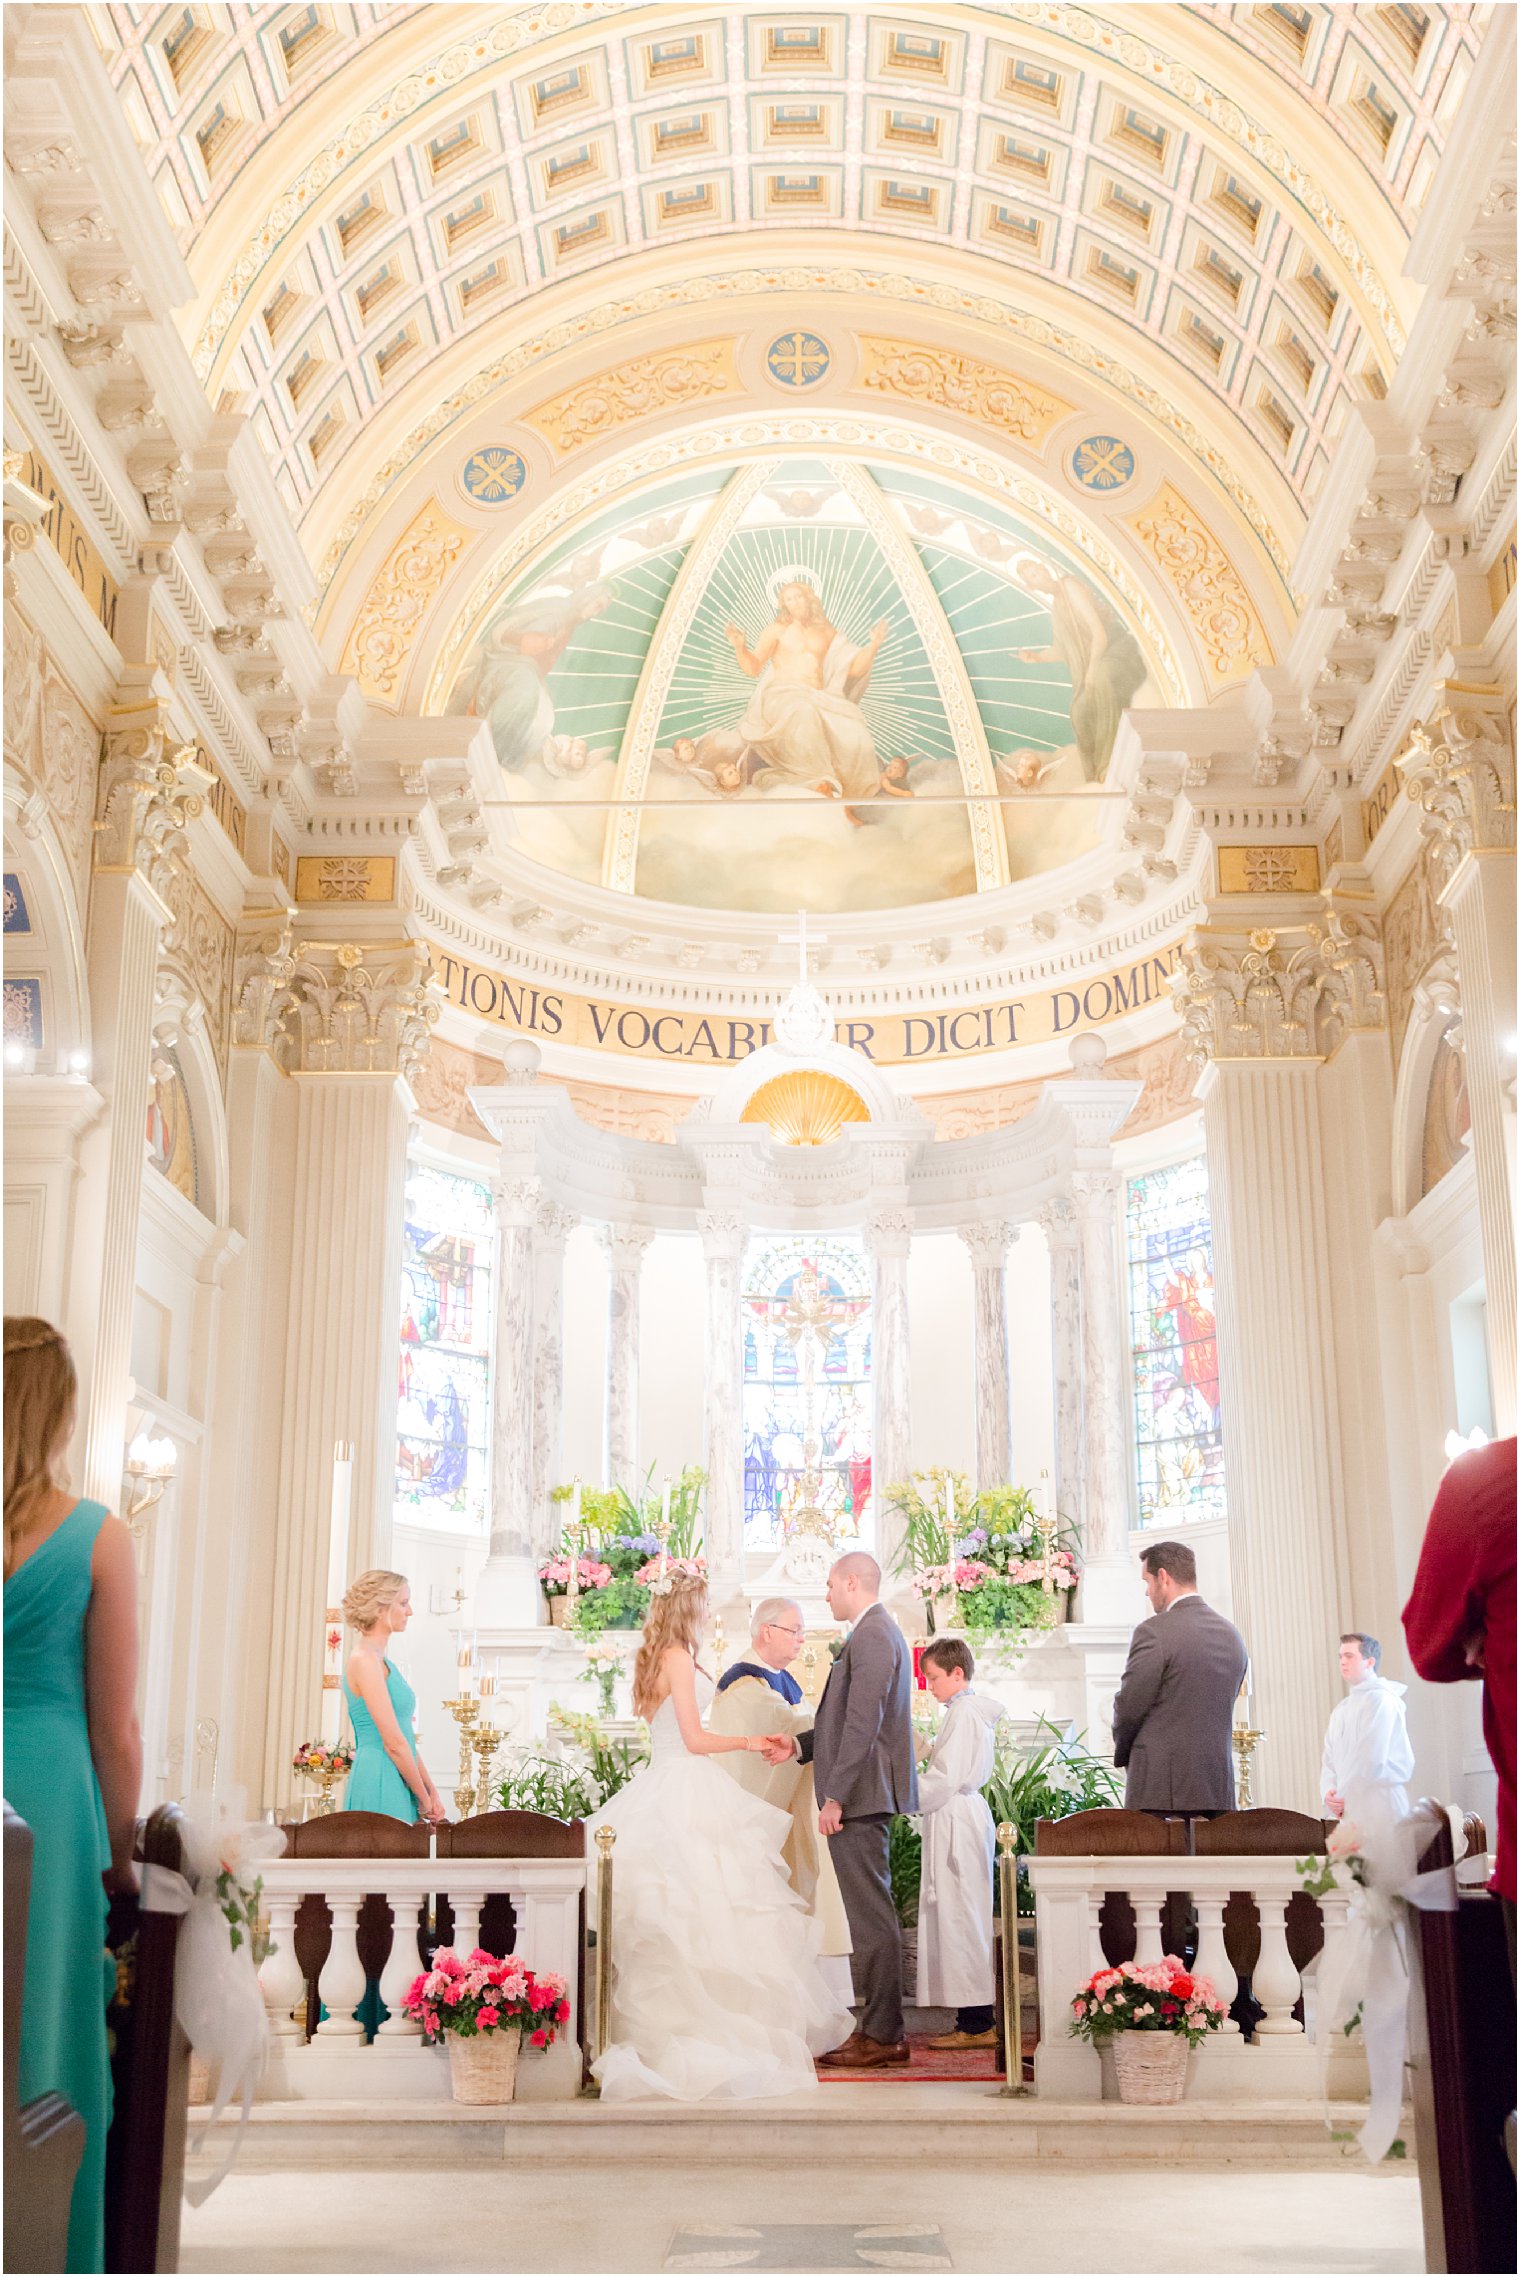 Wedding ceremony at St. Catharine's Church in Spring Lake